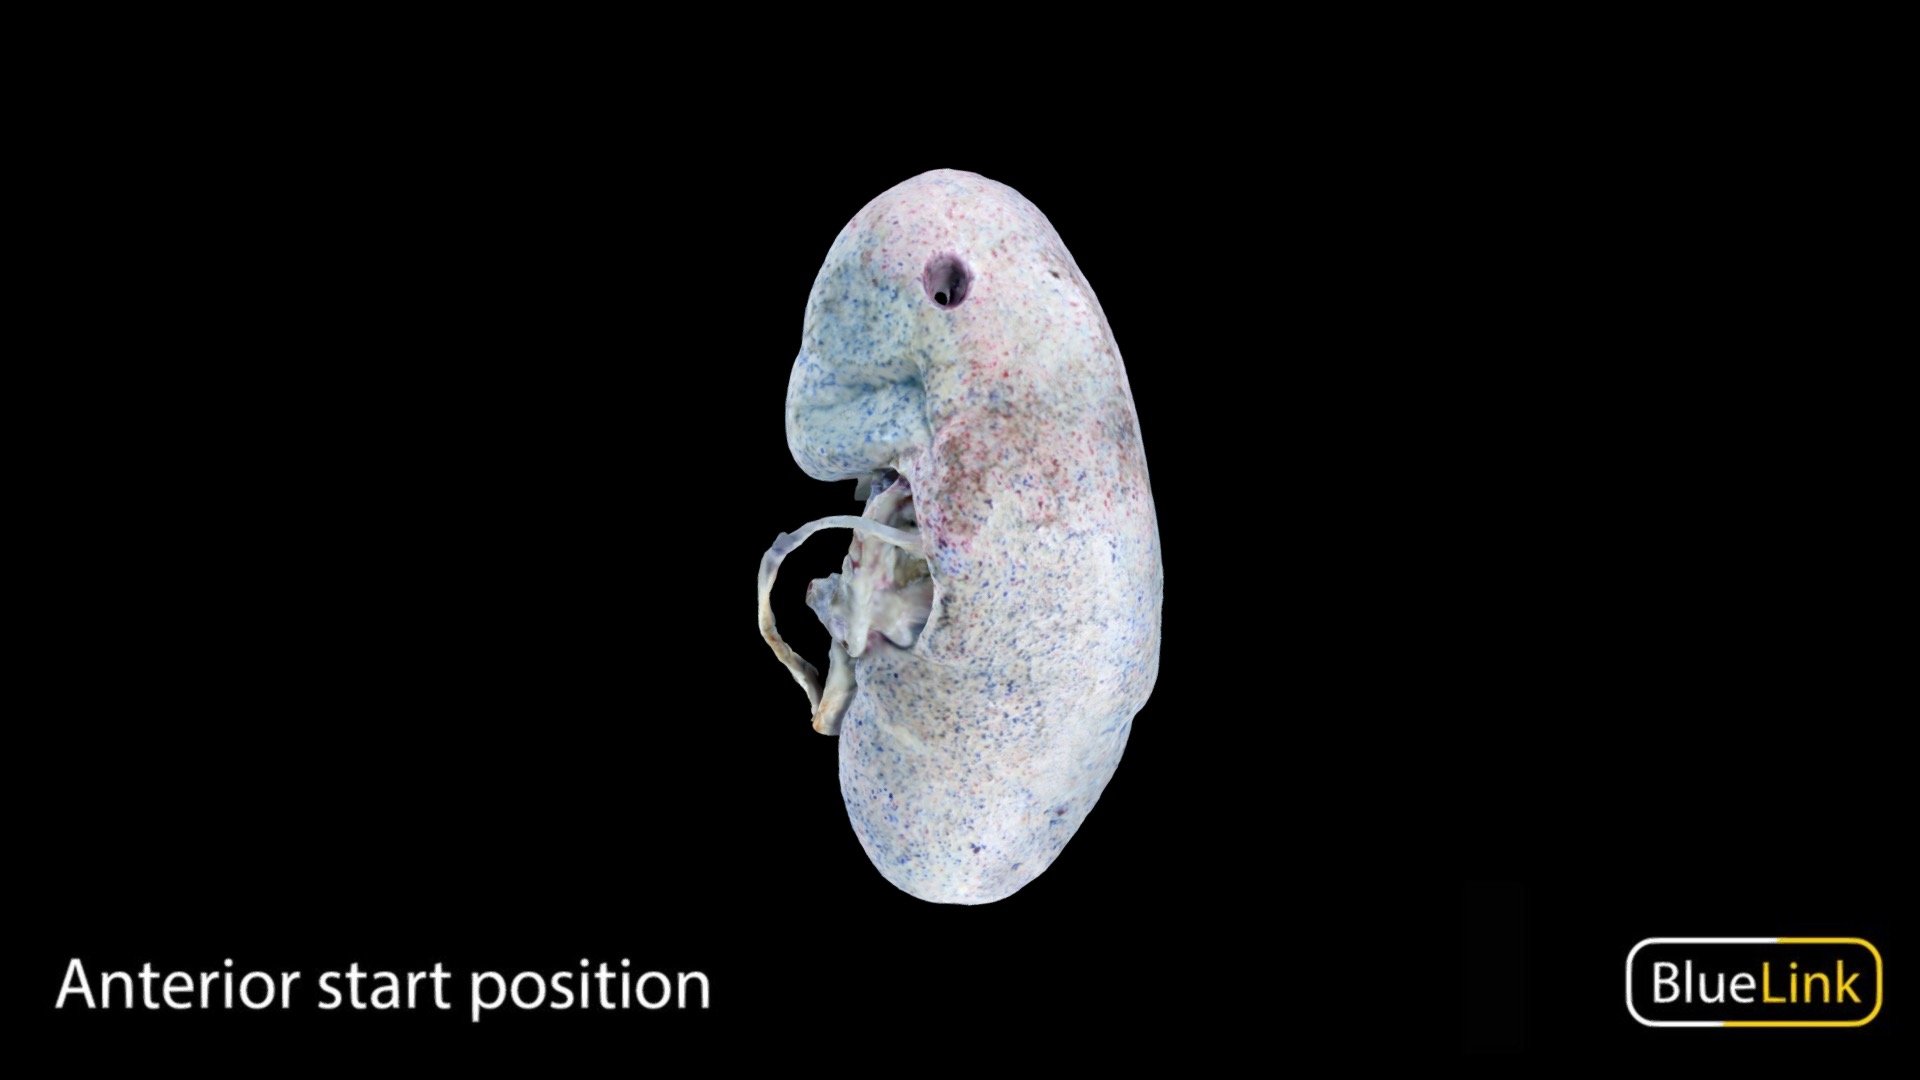 Bisected left kidney with colored vasculature

Captured using photogrammetry

Captured and edited by Nikita Shishu and Julia Egnaczyk

Copyright 2022 BK Alsup &amp; GM Fox

31550 - A02 - Bisected Colored Kidney - Left - 3D model by Bluelink Anatomy - University of Michigan (@bluelinkanatomy) 3d model